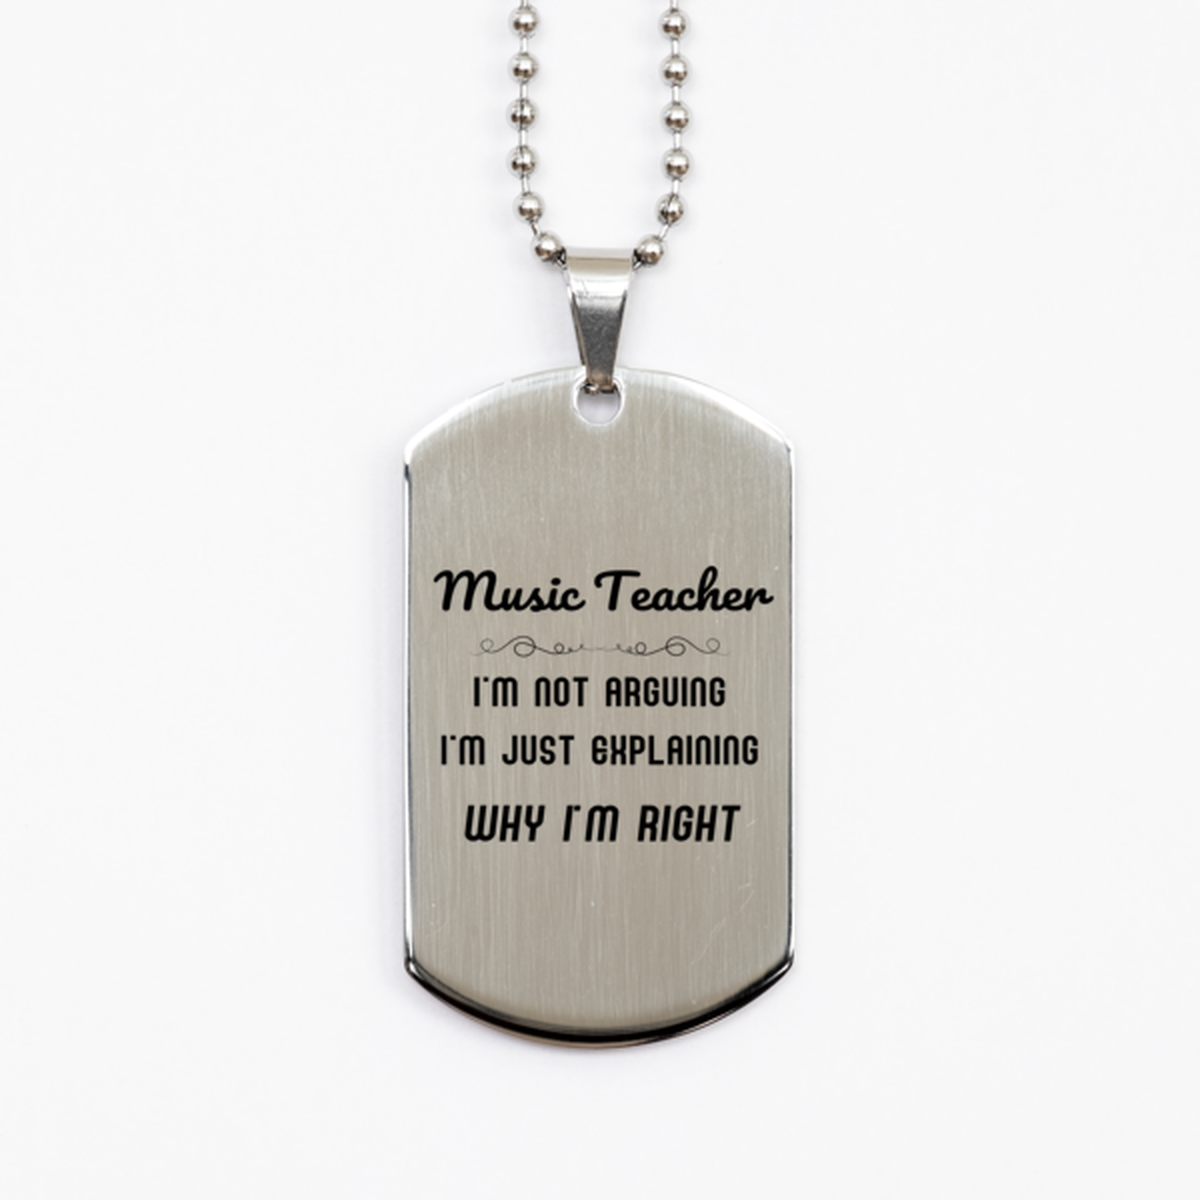 Music Teacher I'm not Arguing. I'm Just Explaining Why I'm RIGHT Silver Dog Tag, Funny Saying Quote Music Teacher Gifts For Music Teacher Graduation Birthday Christmas Gifts for Men Women Coworker